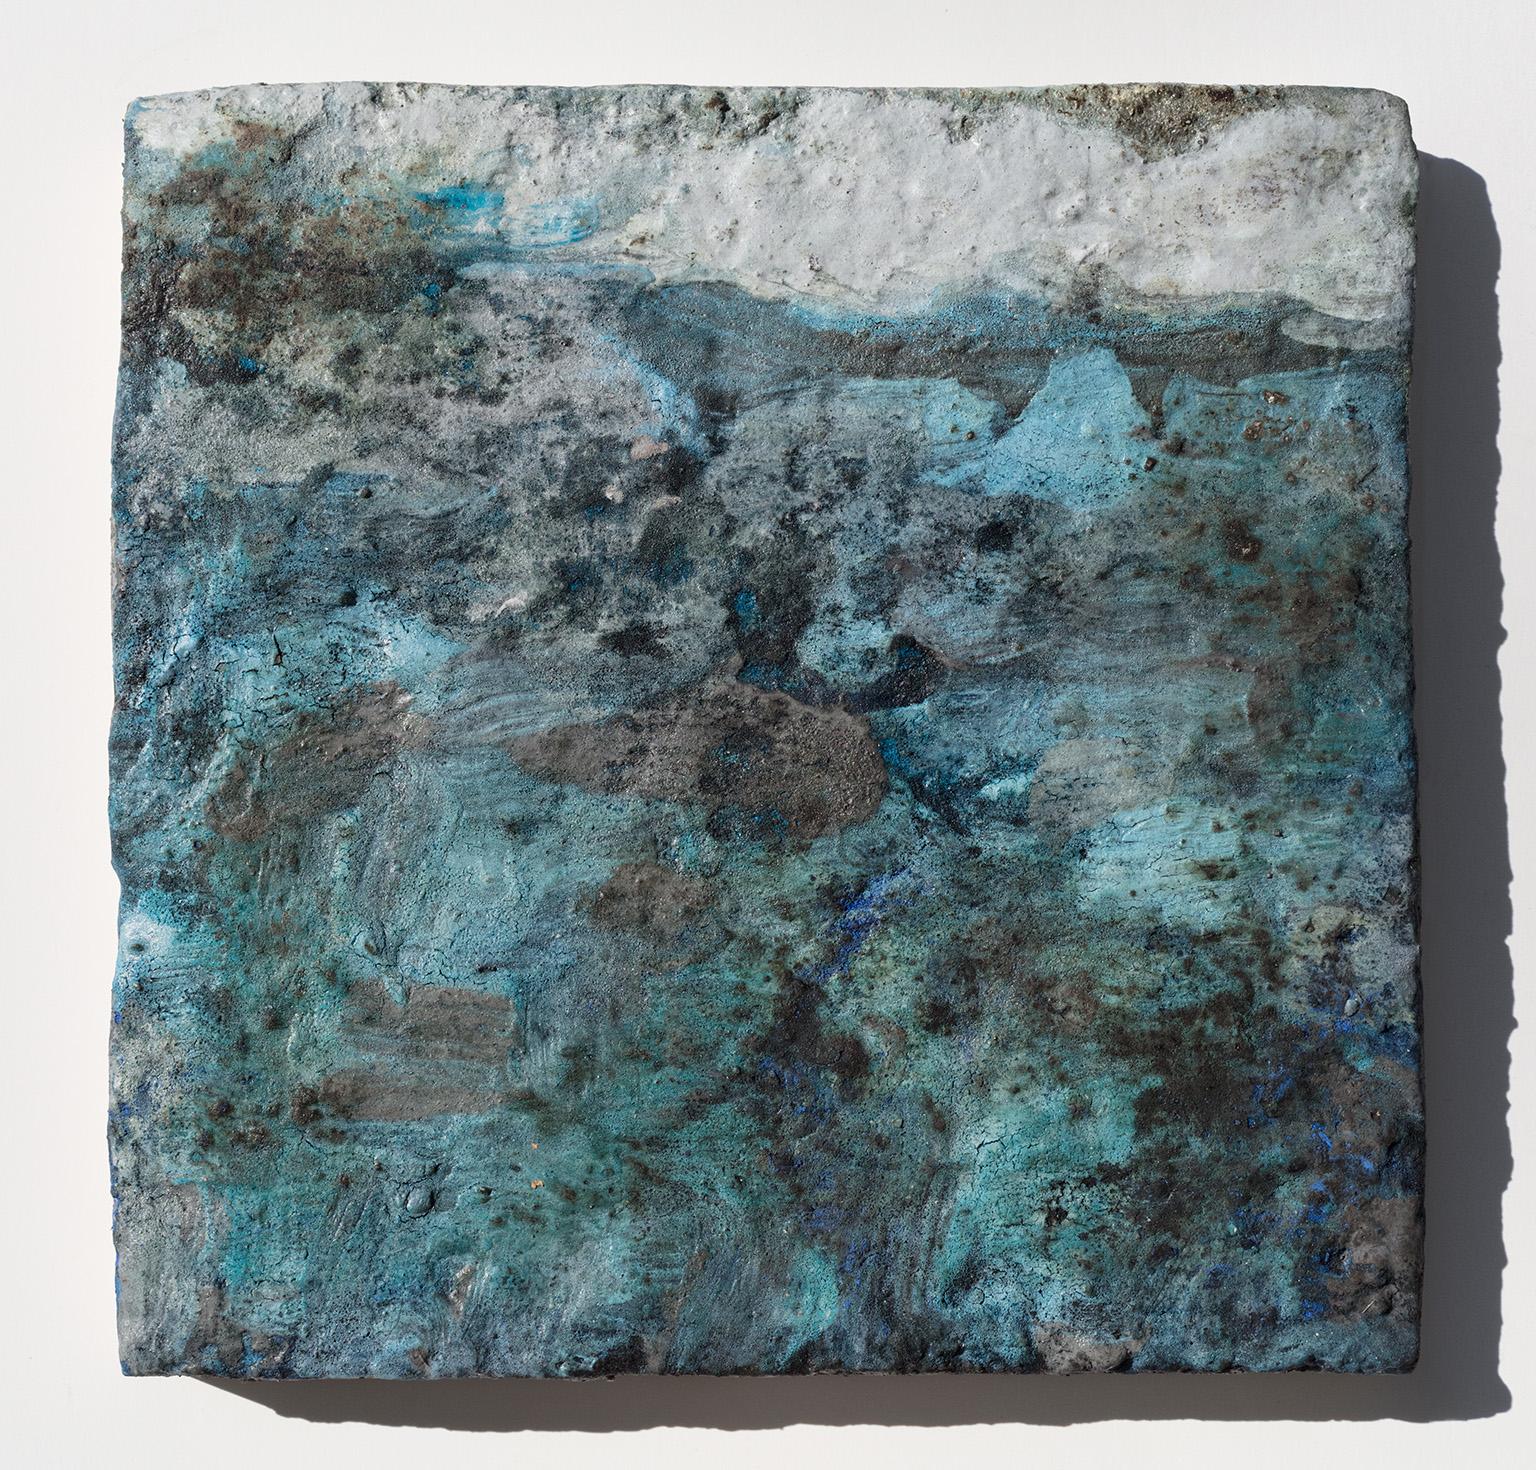 Terra Bruciata (Scorched Earth) #4 - Small abstract blue painting